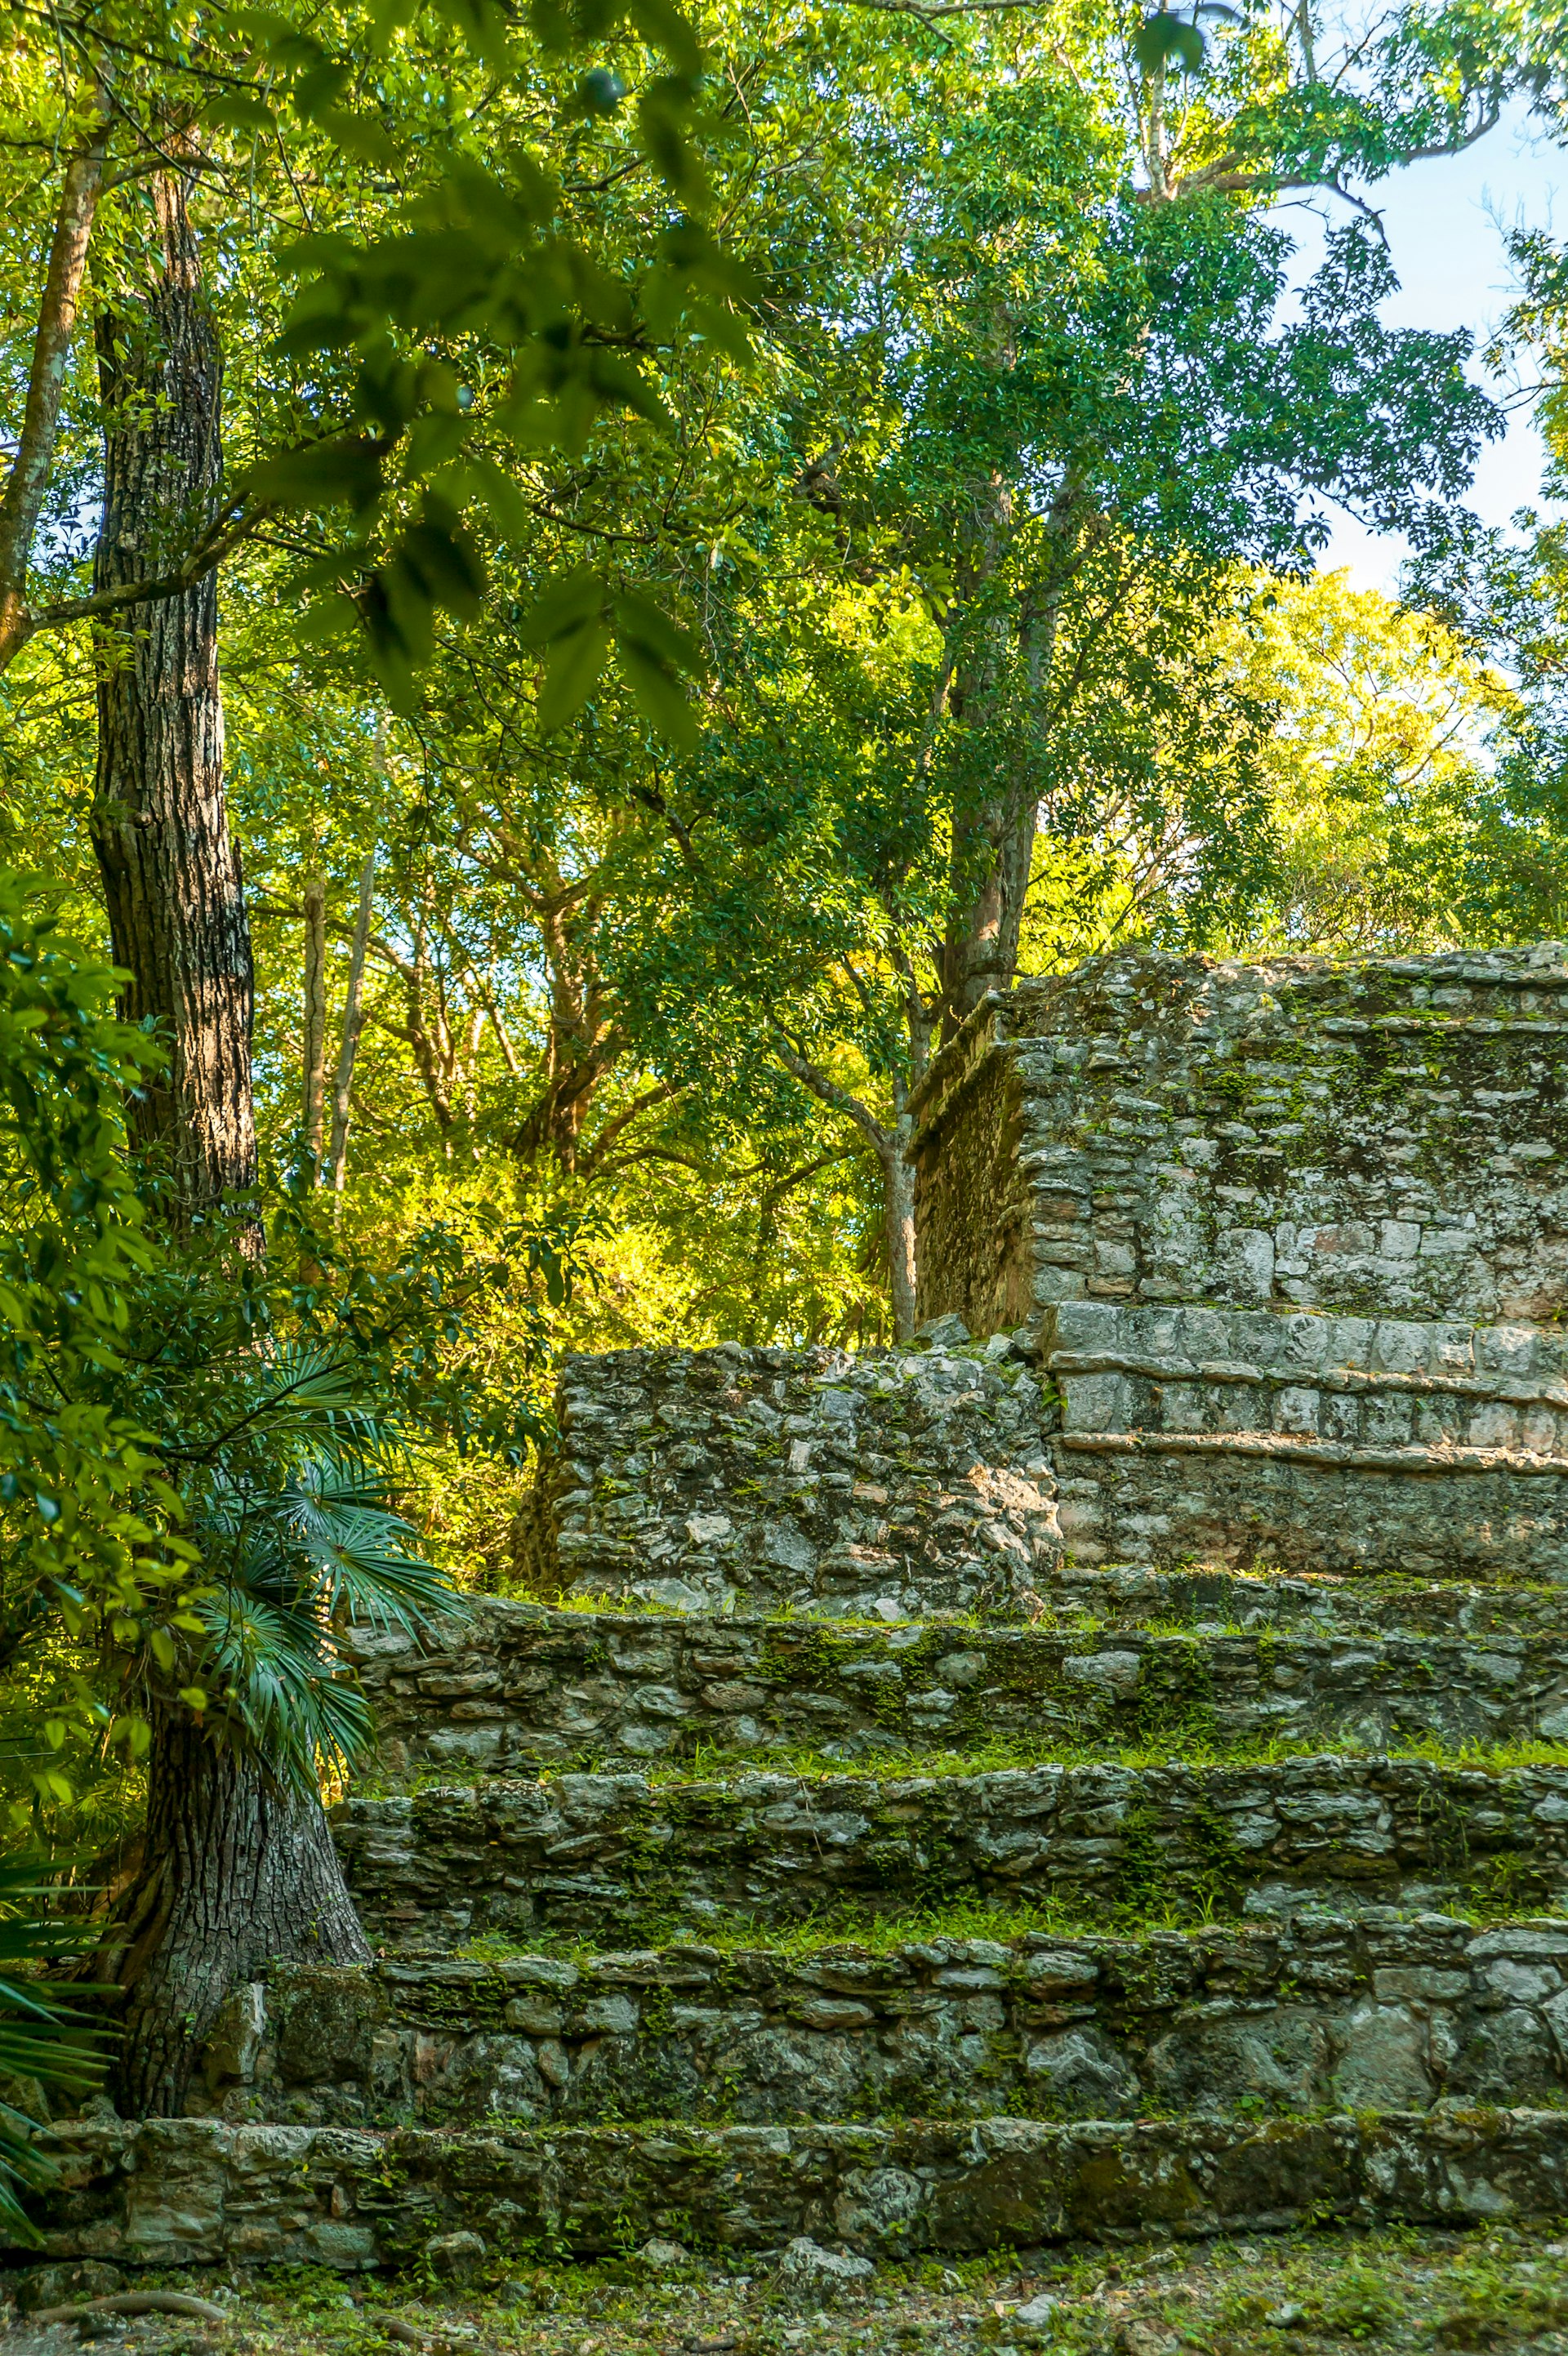 Ruins of Muyil (also known as ChunyaxchÃ©), in the middle of a lush tropical forest